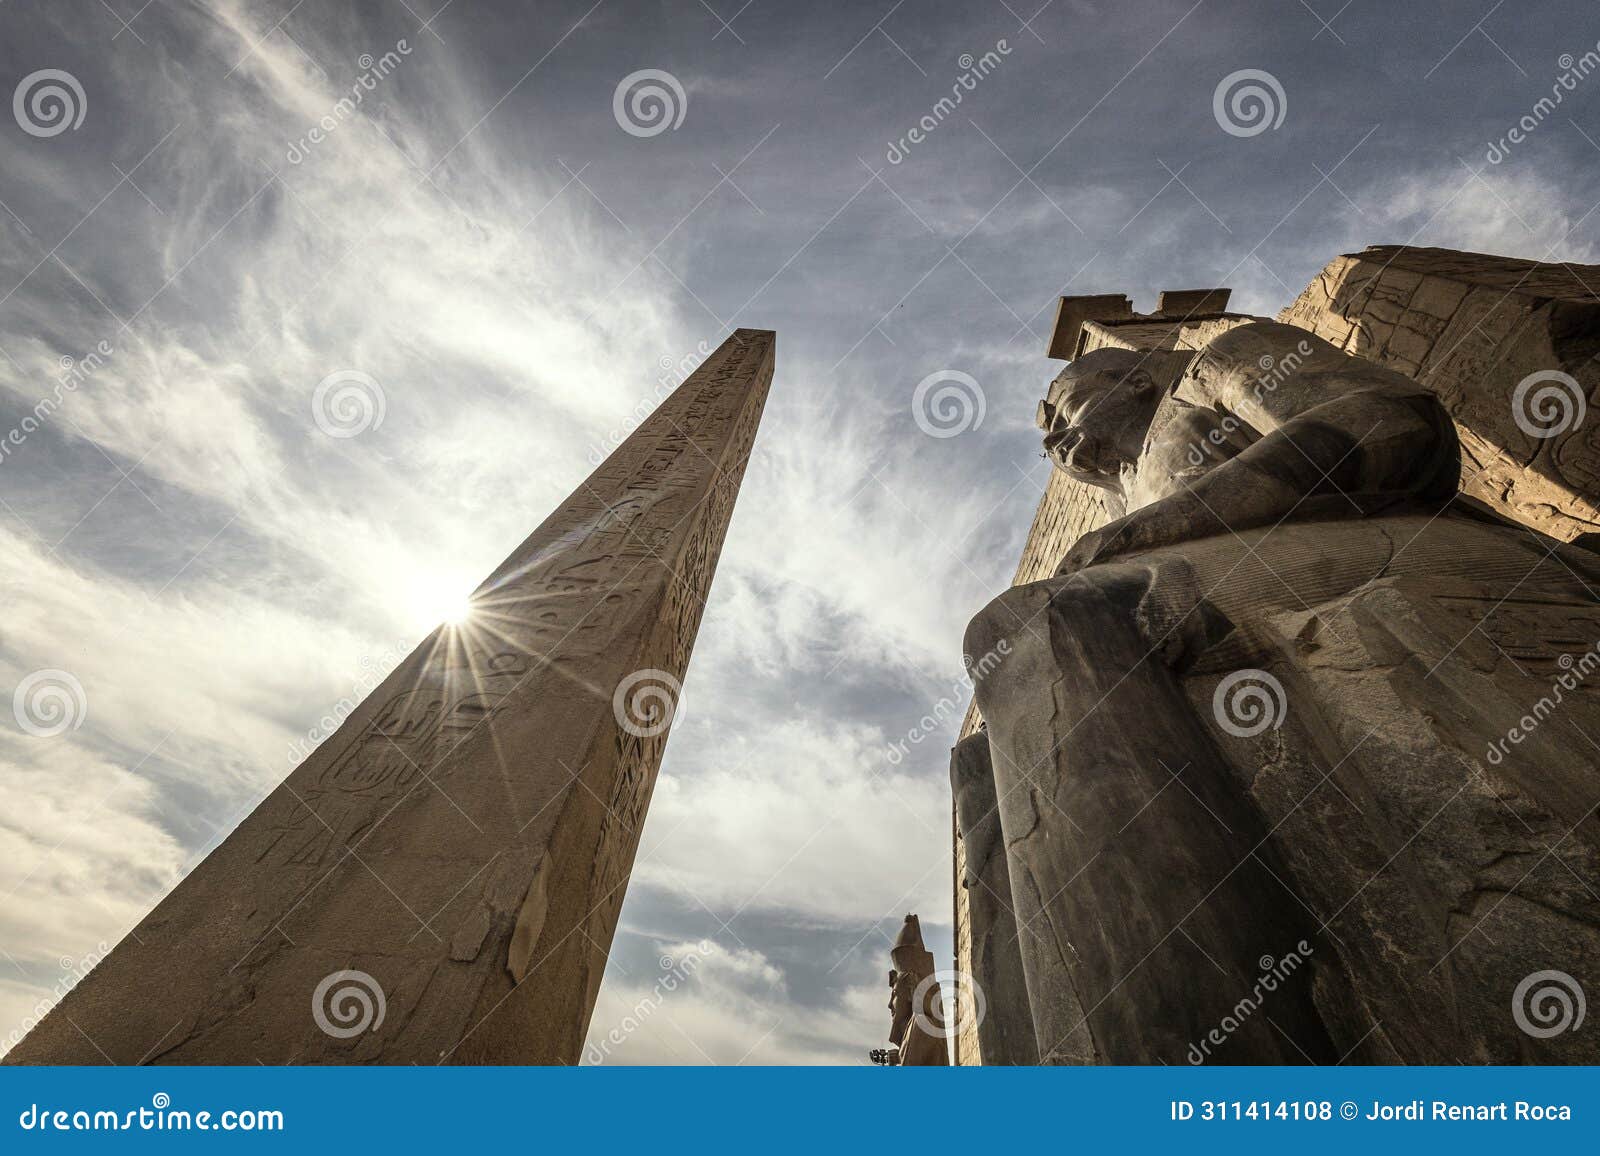 luxor temple in egypt